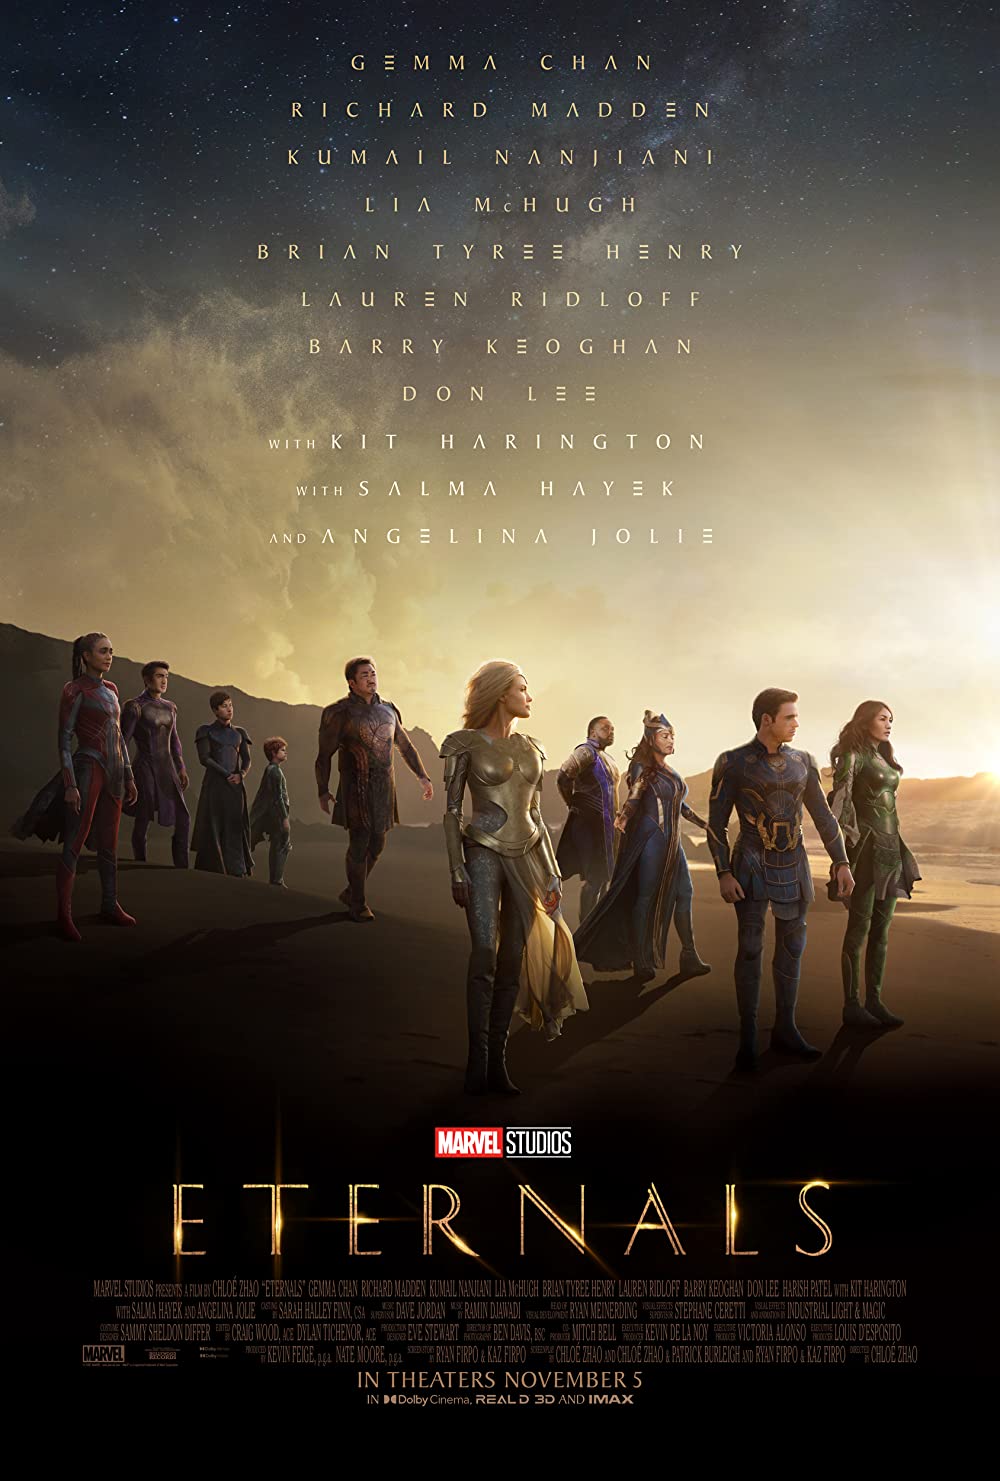 The Eternals, a race of immortal beings with superhuman powers who have secretly lived on Earth for thousands of years, reunite to battle the evil Deviants.